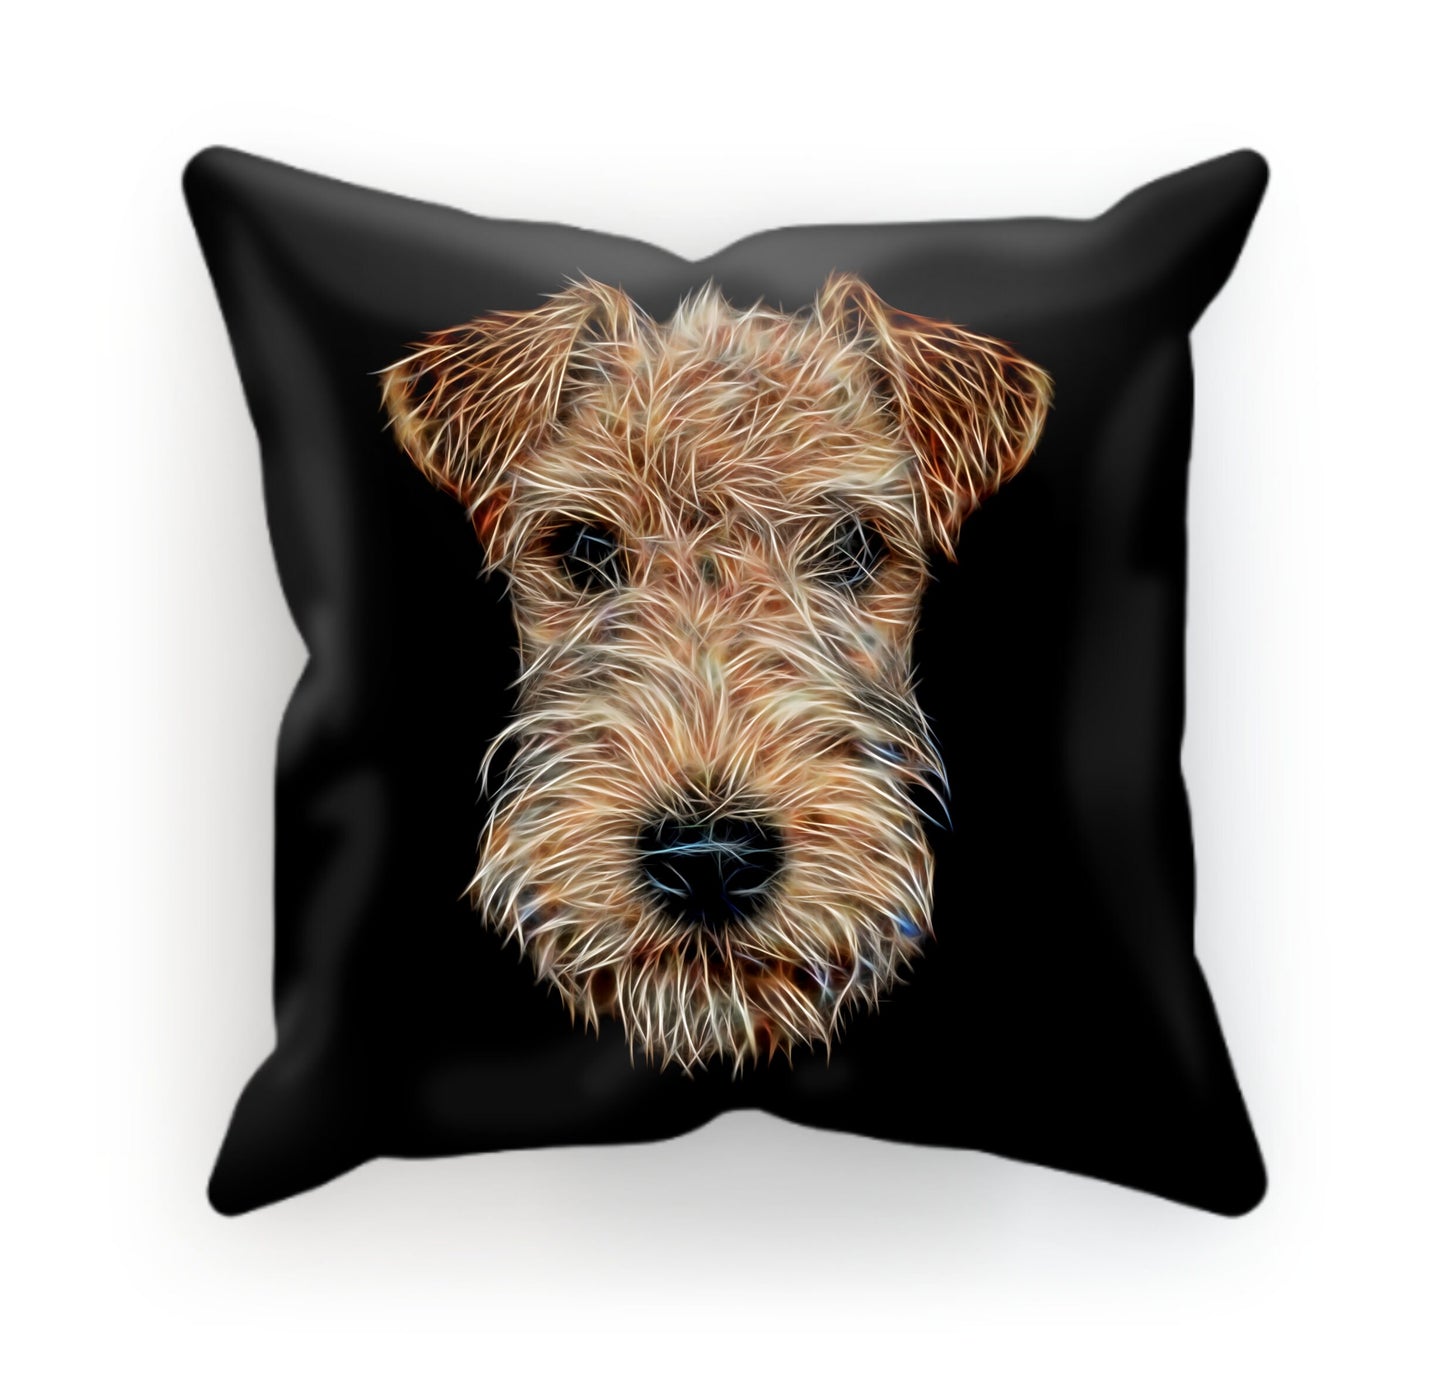 Lakeland Terrier Cushion with Insert